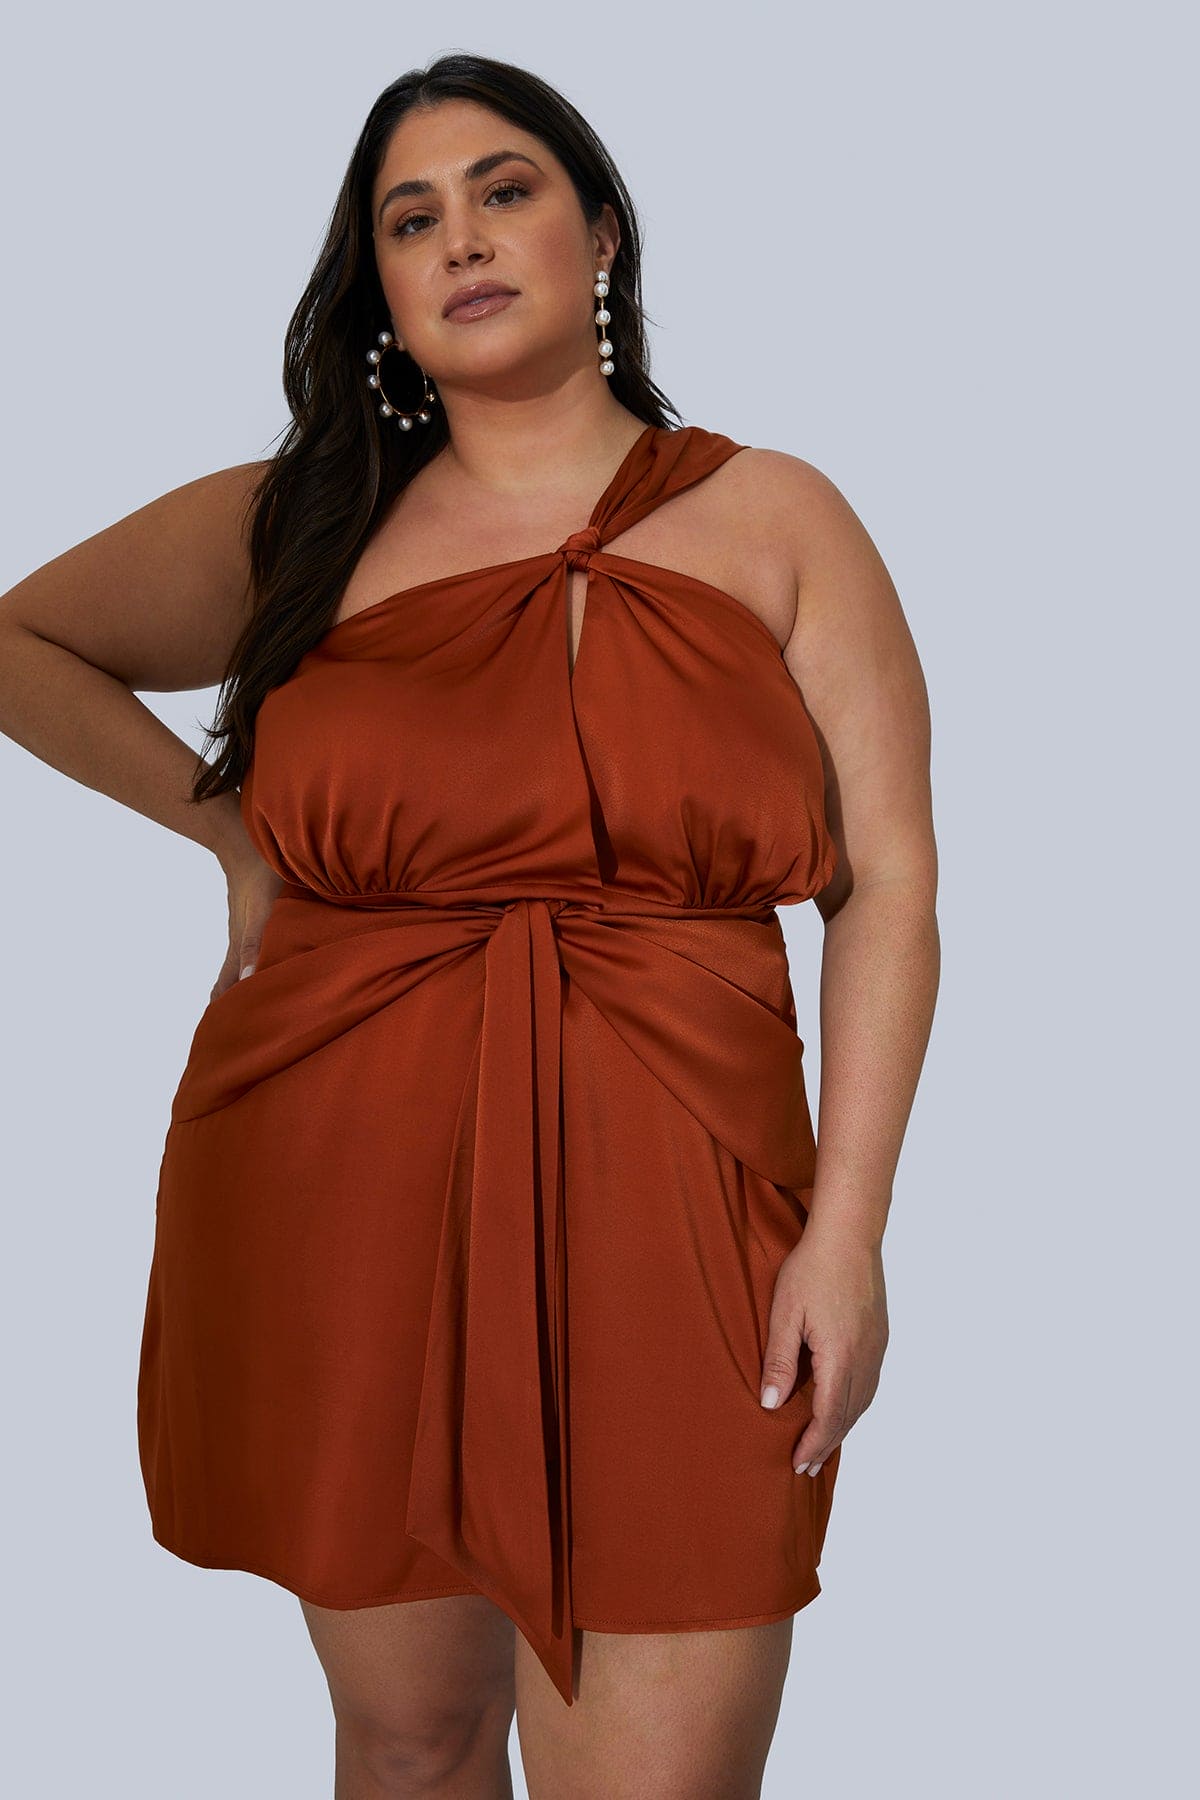 CEO and Founder of Gia IRL, Gia Sinatra, in the Maya Mini Silk Dress size 16 in Rust for Plus Size Women. Front view with hand on hip.